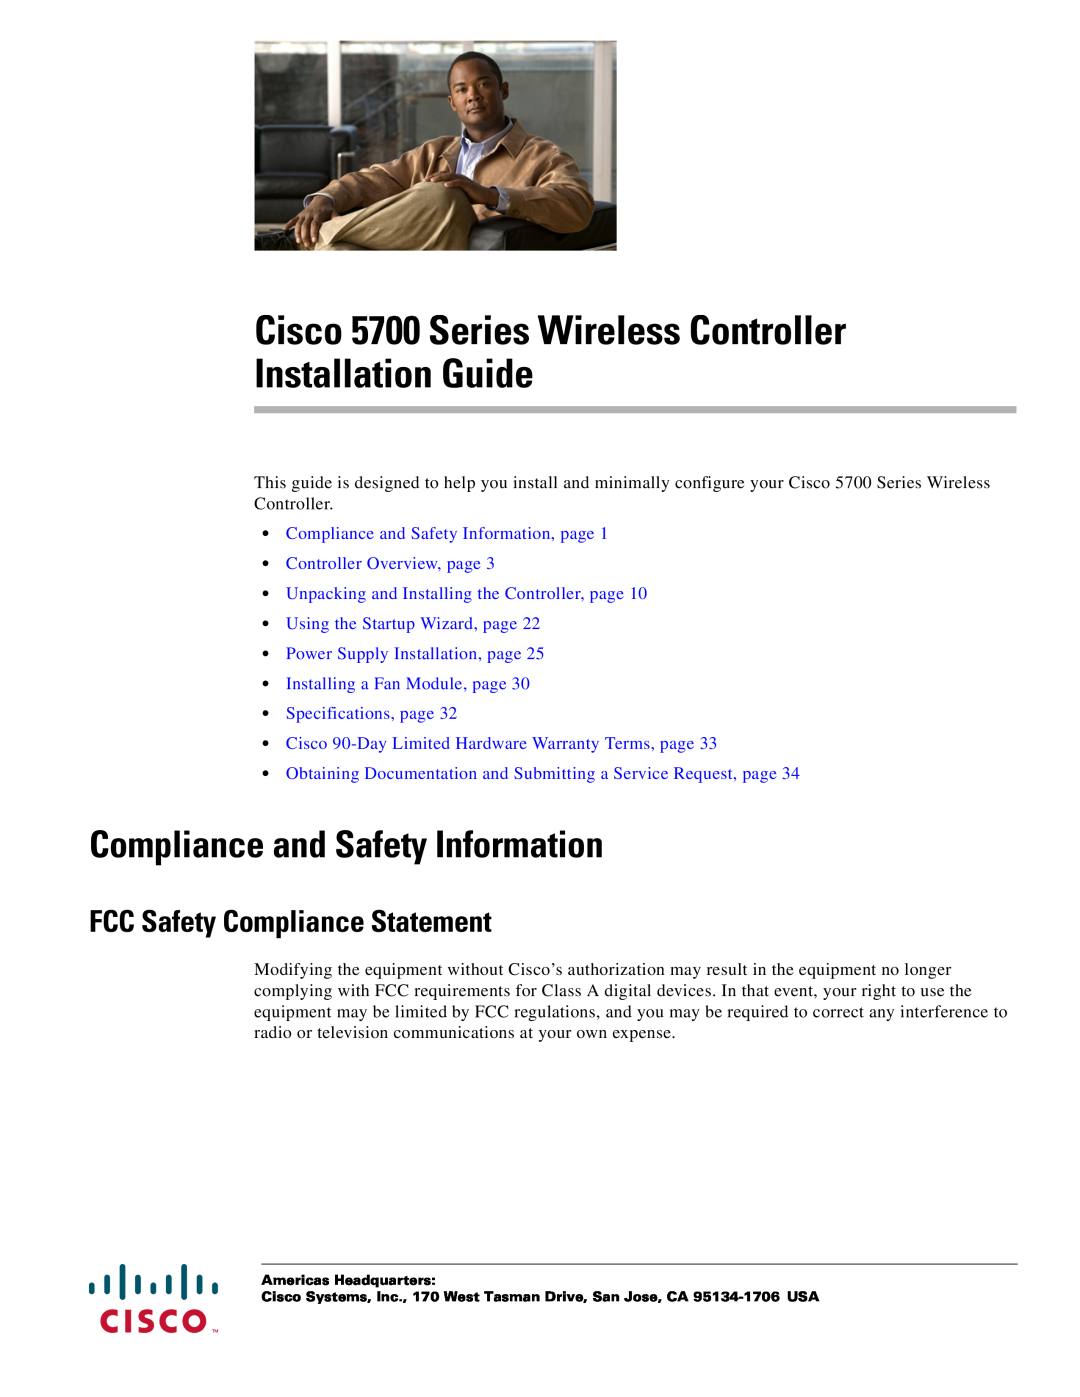 Cisco Systems AIRCT576025K9 specifications Compliance and Safety Information, FCC Safety Compliance Statement 